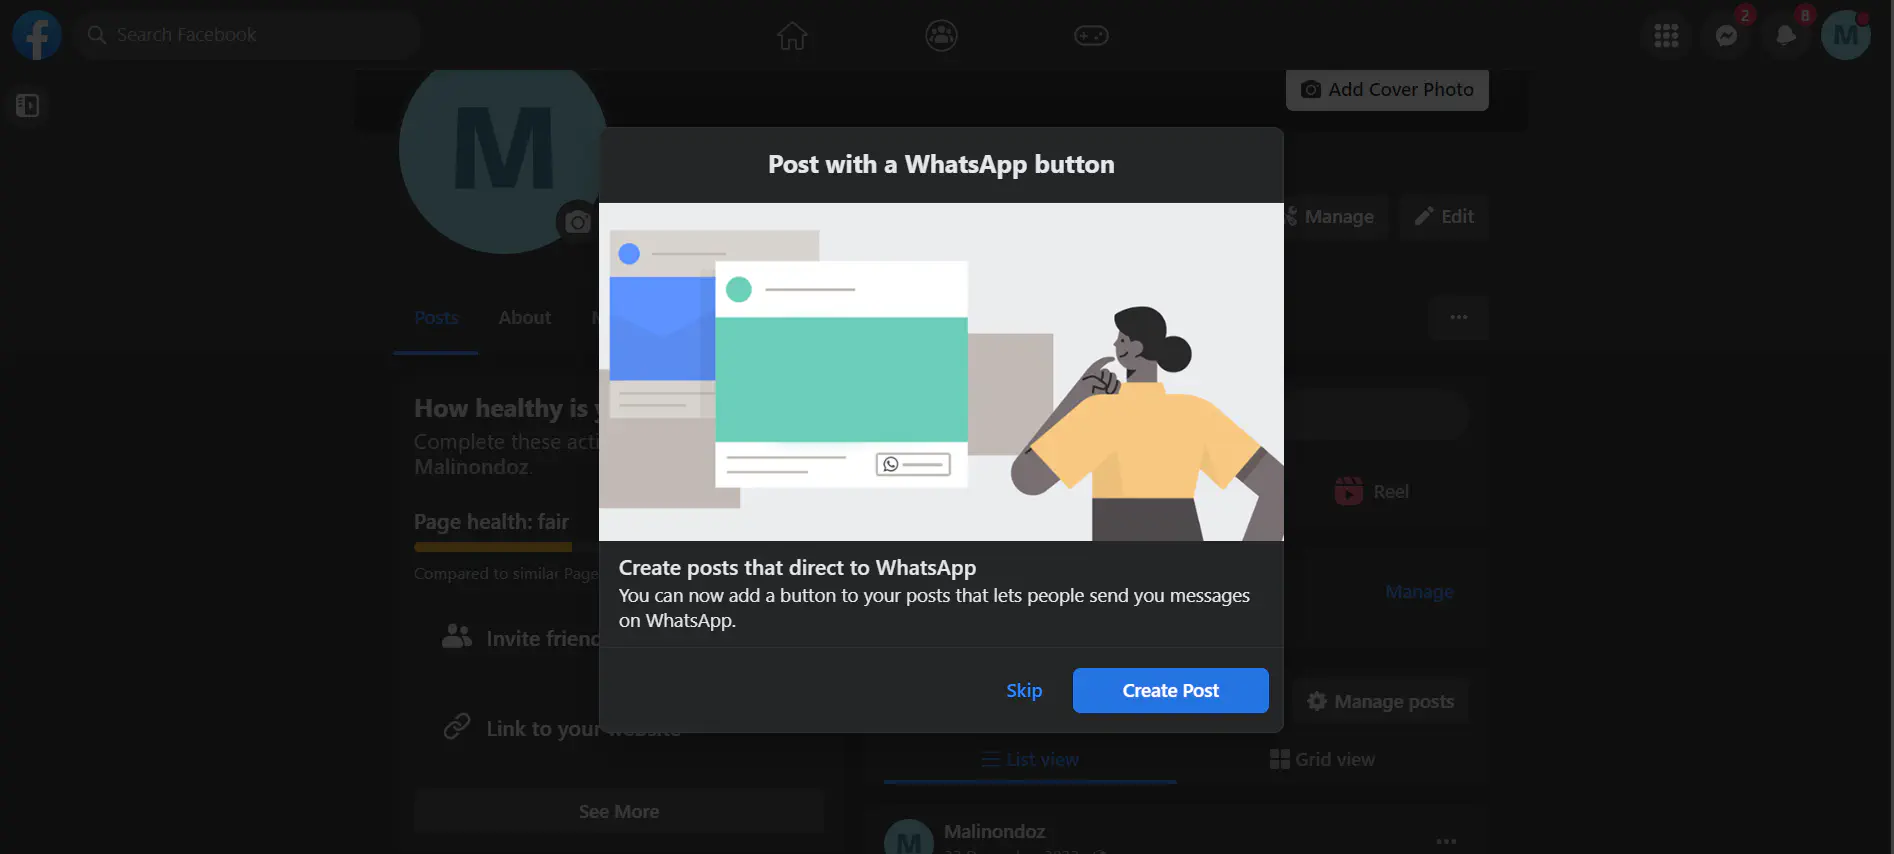 Window for choosing to create a post that click to WhatsApp.